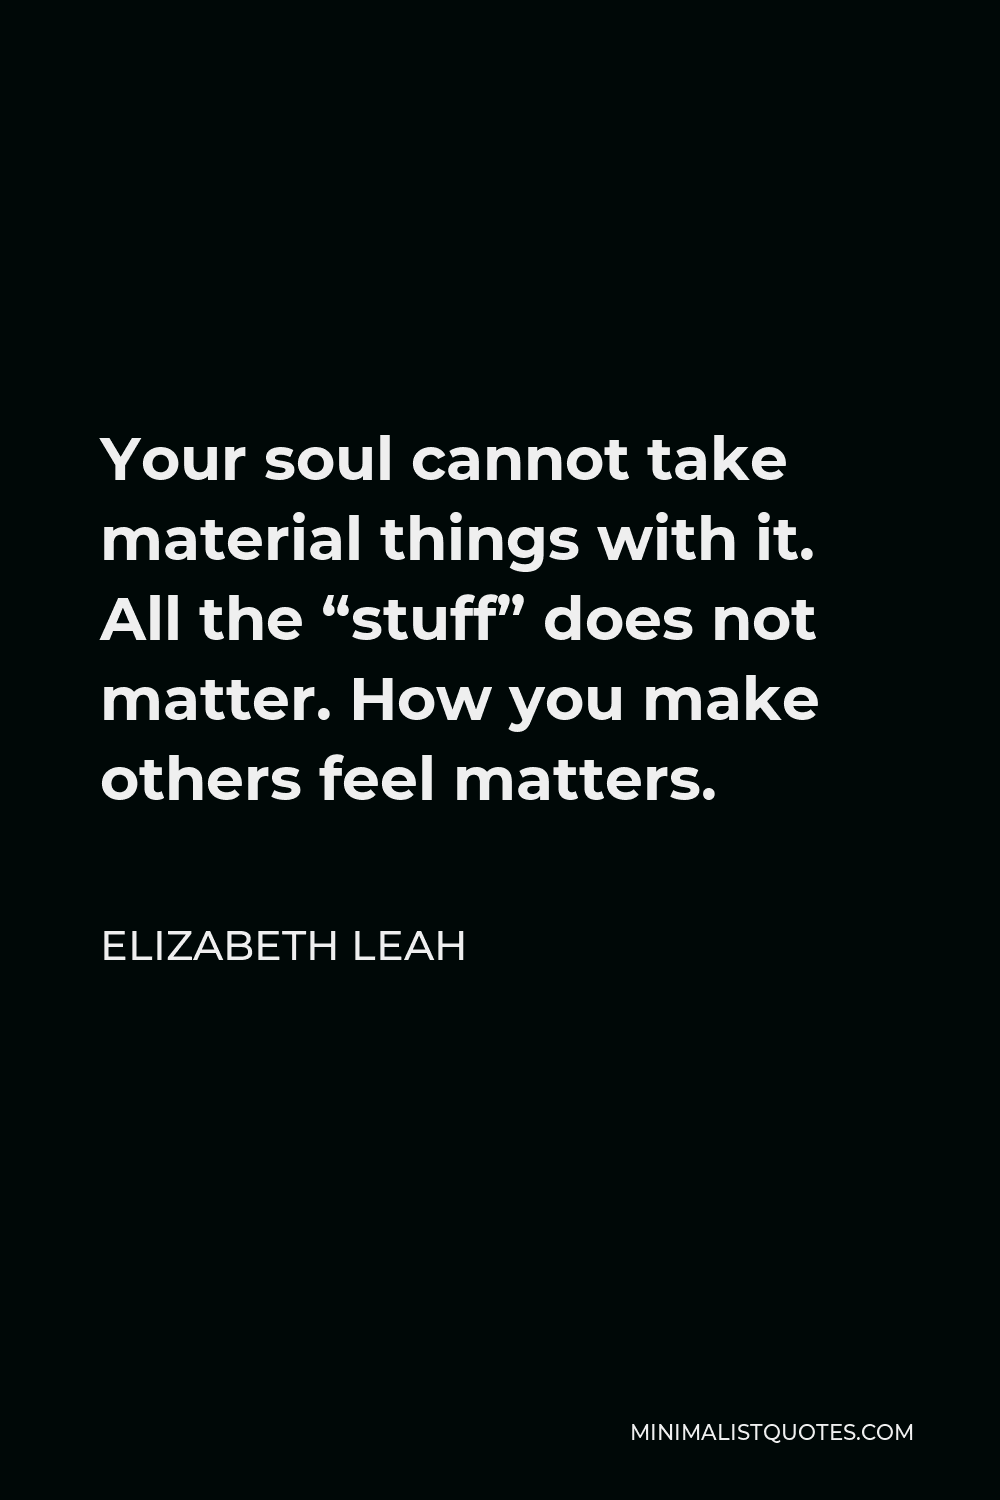 Elizabeth Leah Quote - Your soul cannot take material things with it. All the “stuff” does not matter. How you make others feel matters.